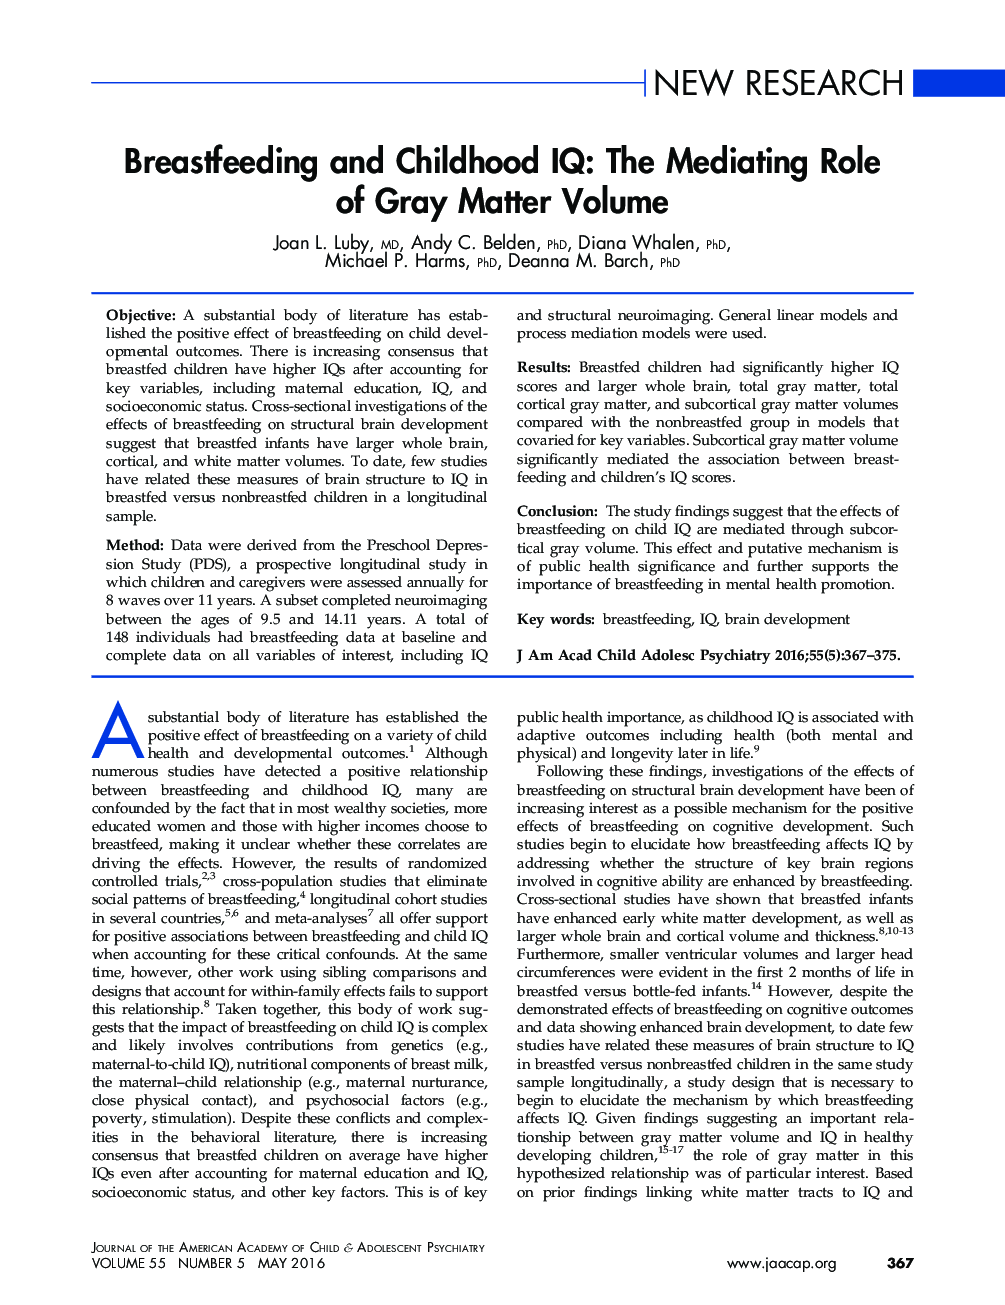 Breastfeeding and Childhood IQ: The Mediating Role of Gray Matter Volume 